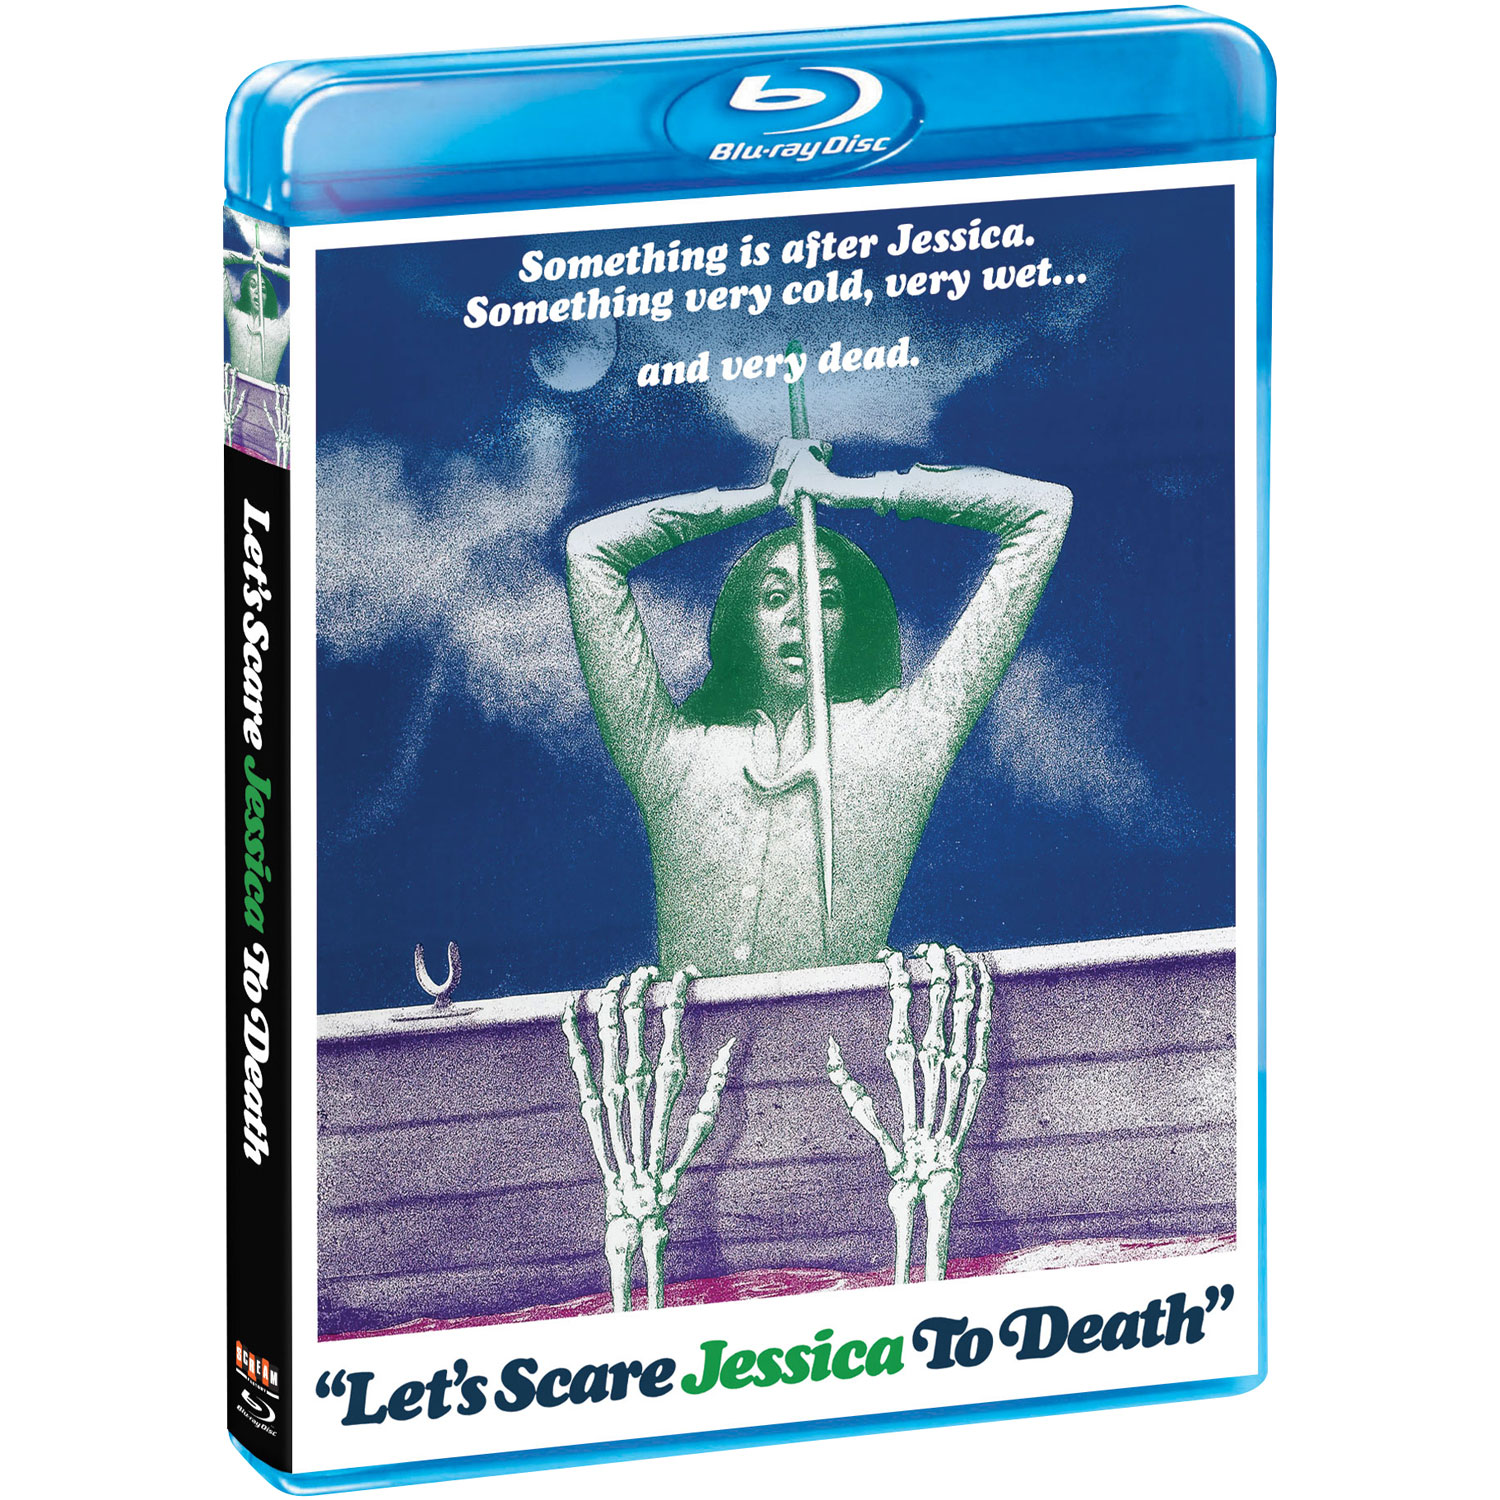 Let's Scare Jessica To Death (English) (Blu-ray)